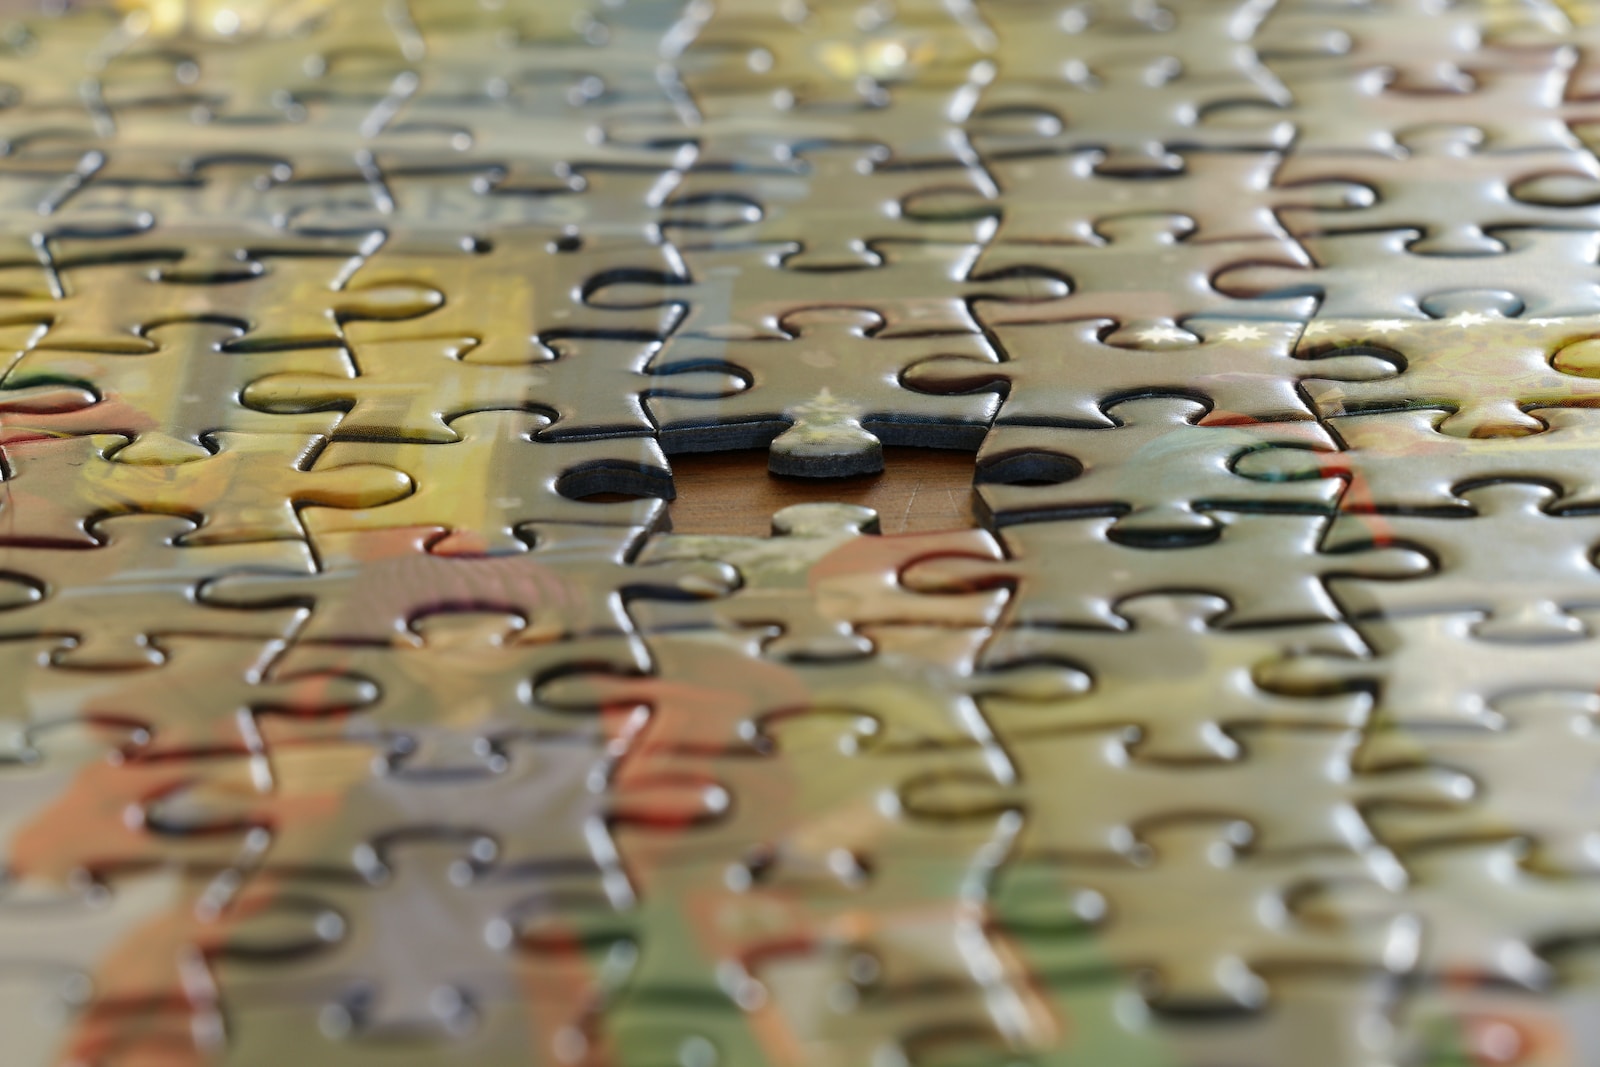 a close up view of a puzzle piece